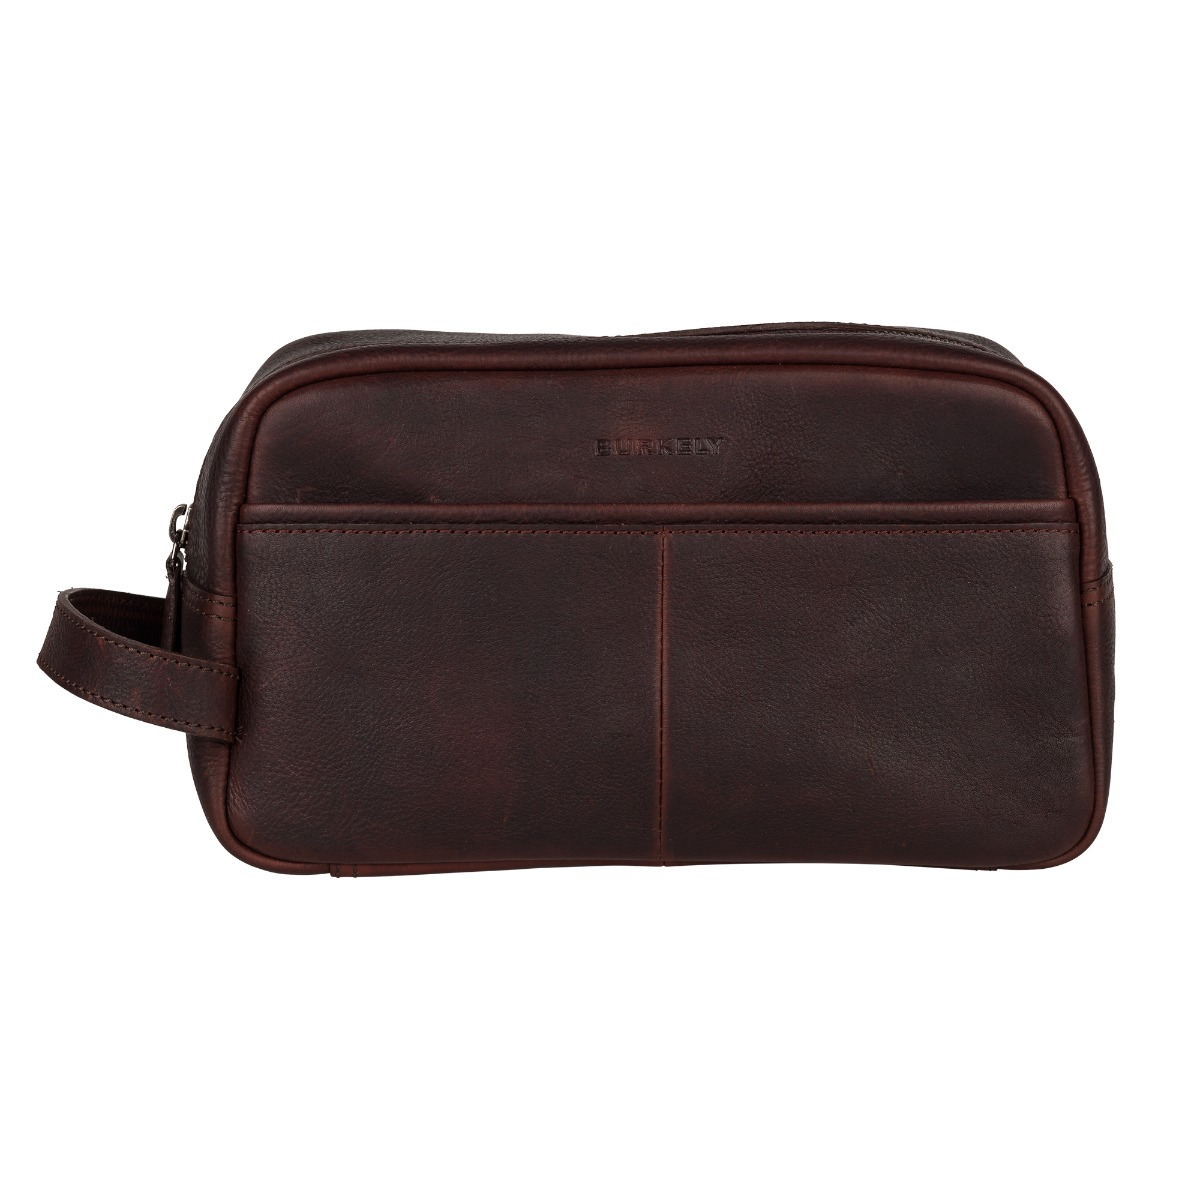 Burkely Antique Avery Toiletry Bag Brown